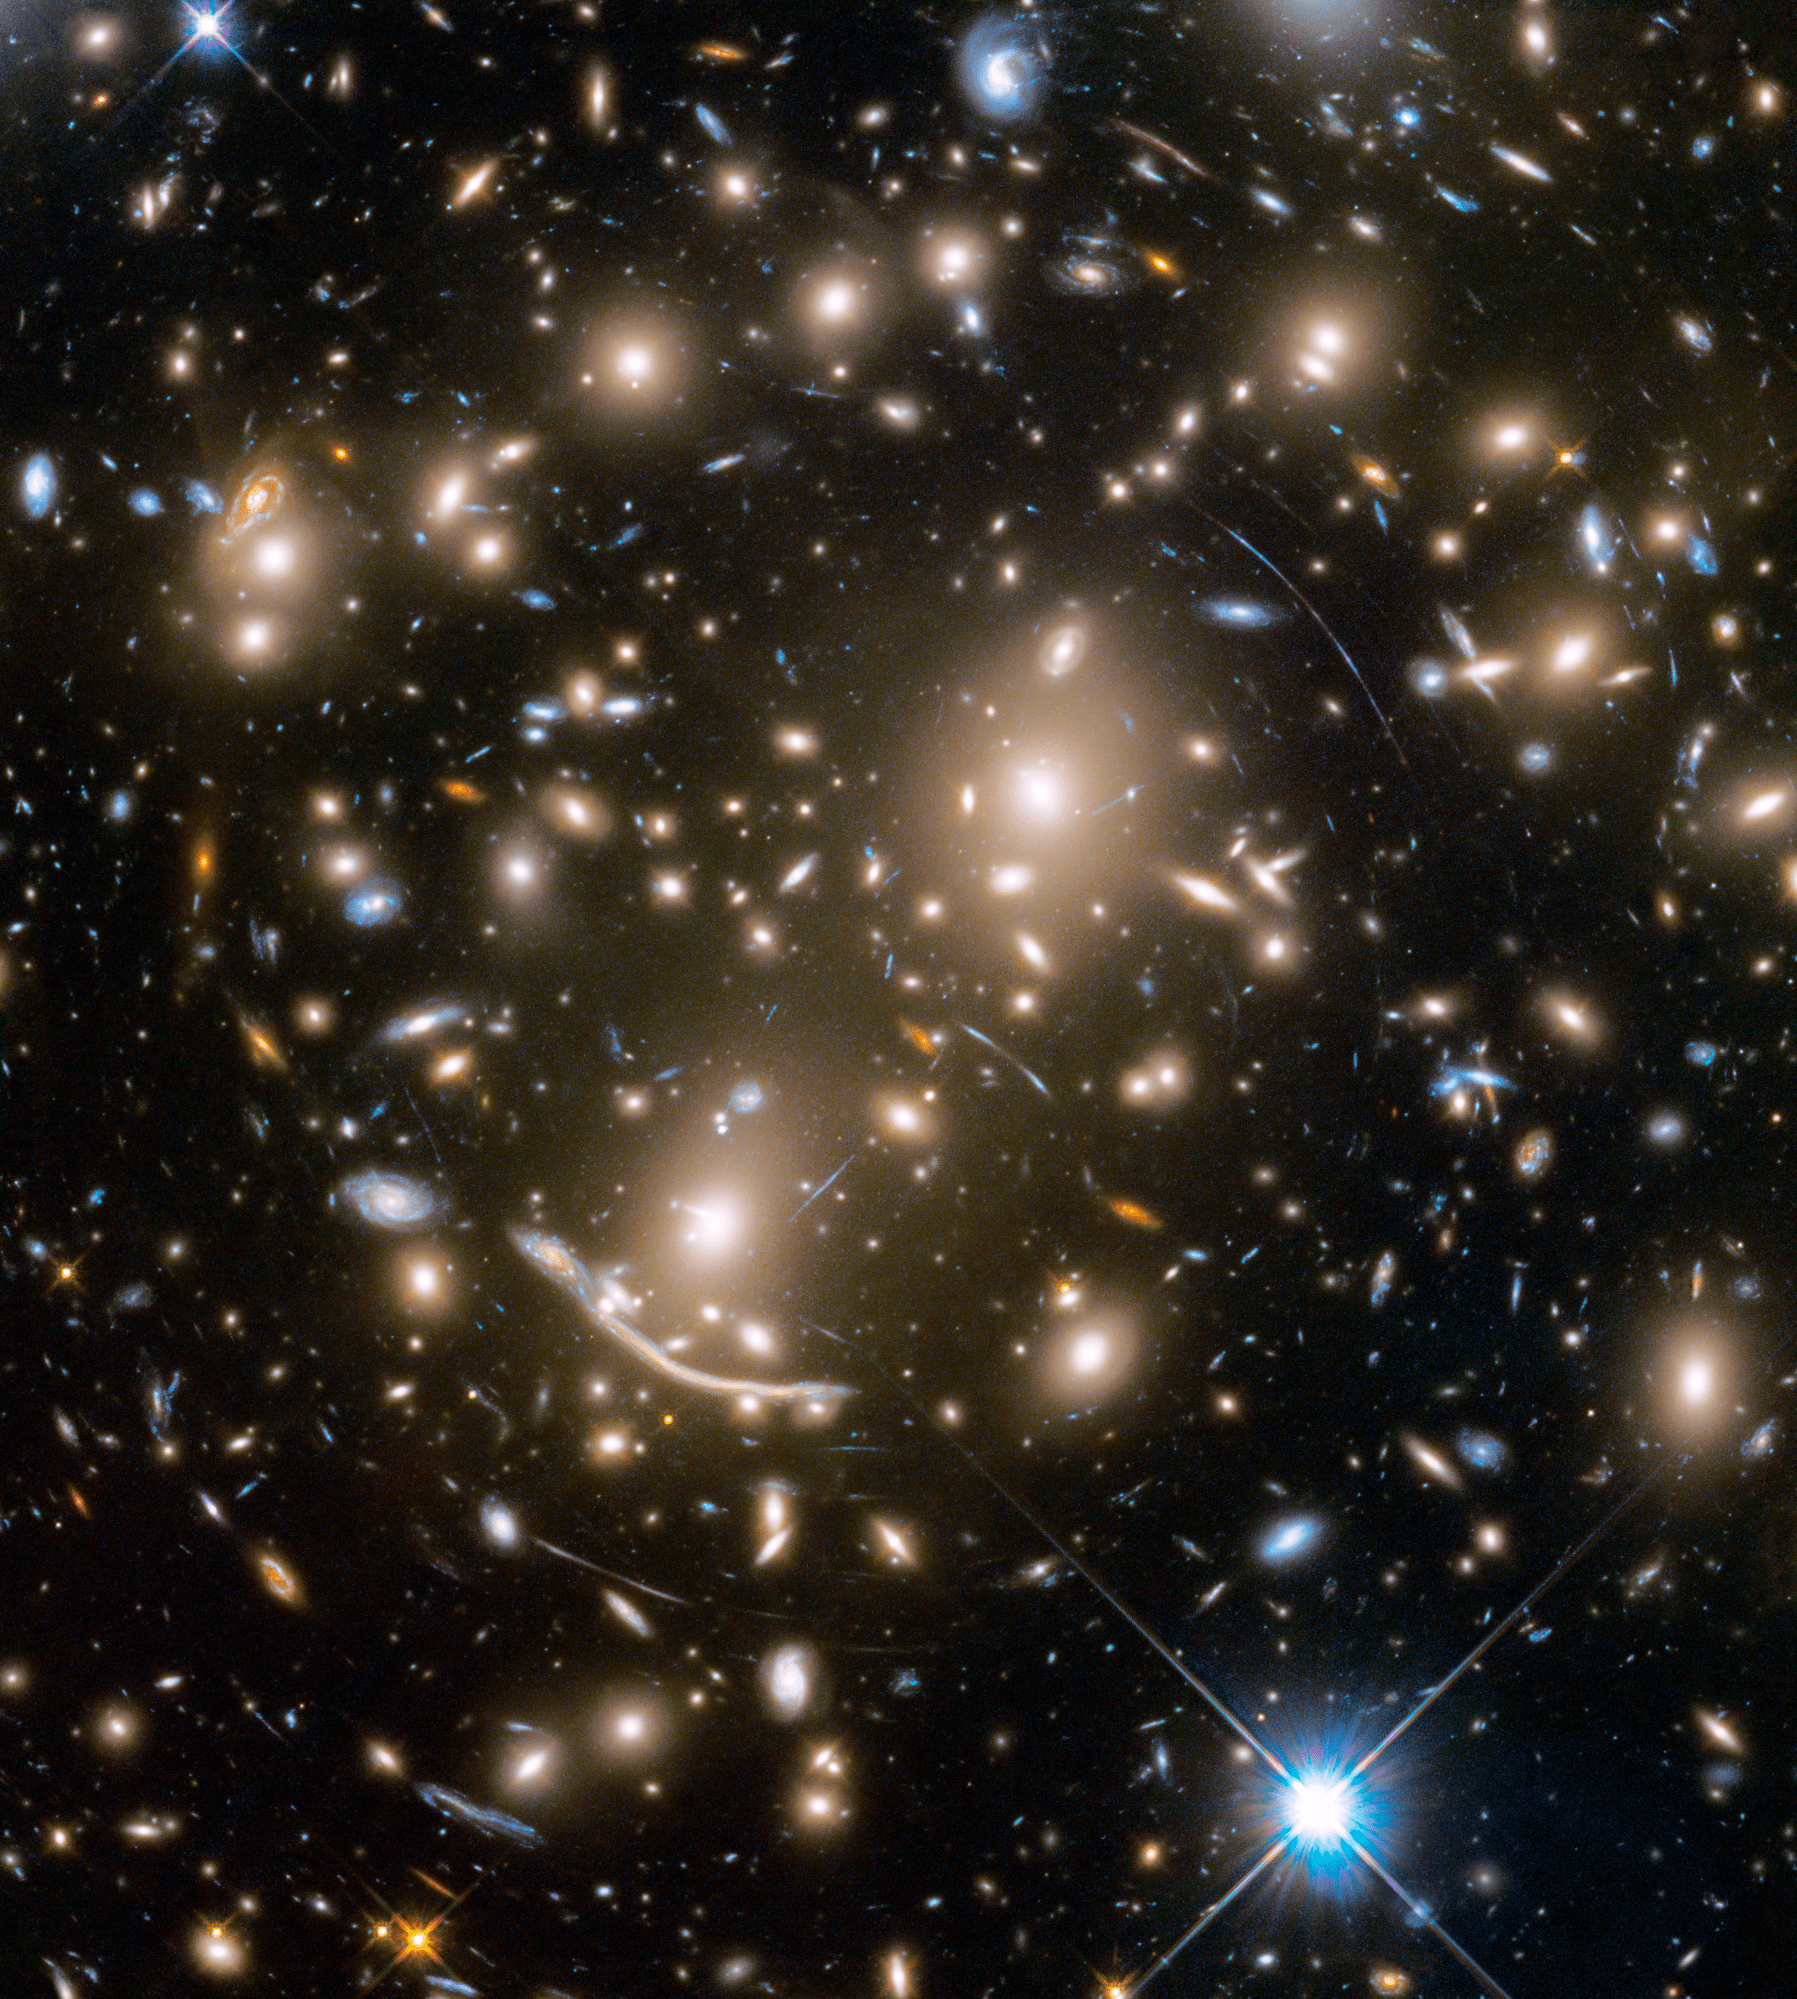 A packed field of galaxies and curved blue streaks and arcs. Bright blue-white foreground star at bottom right.